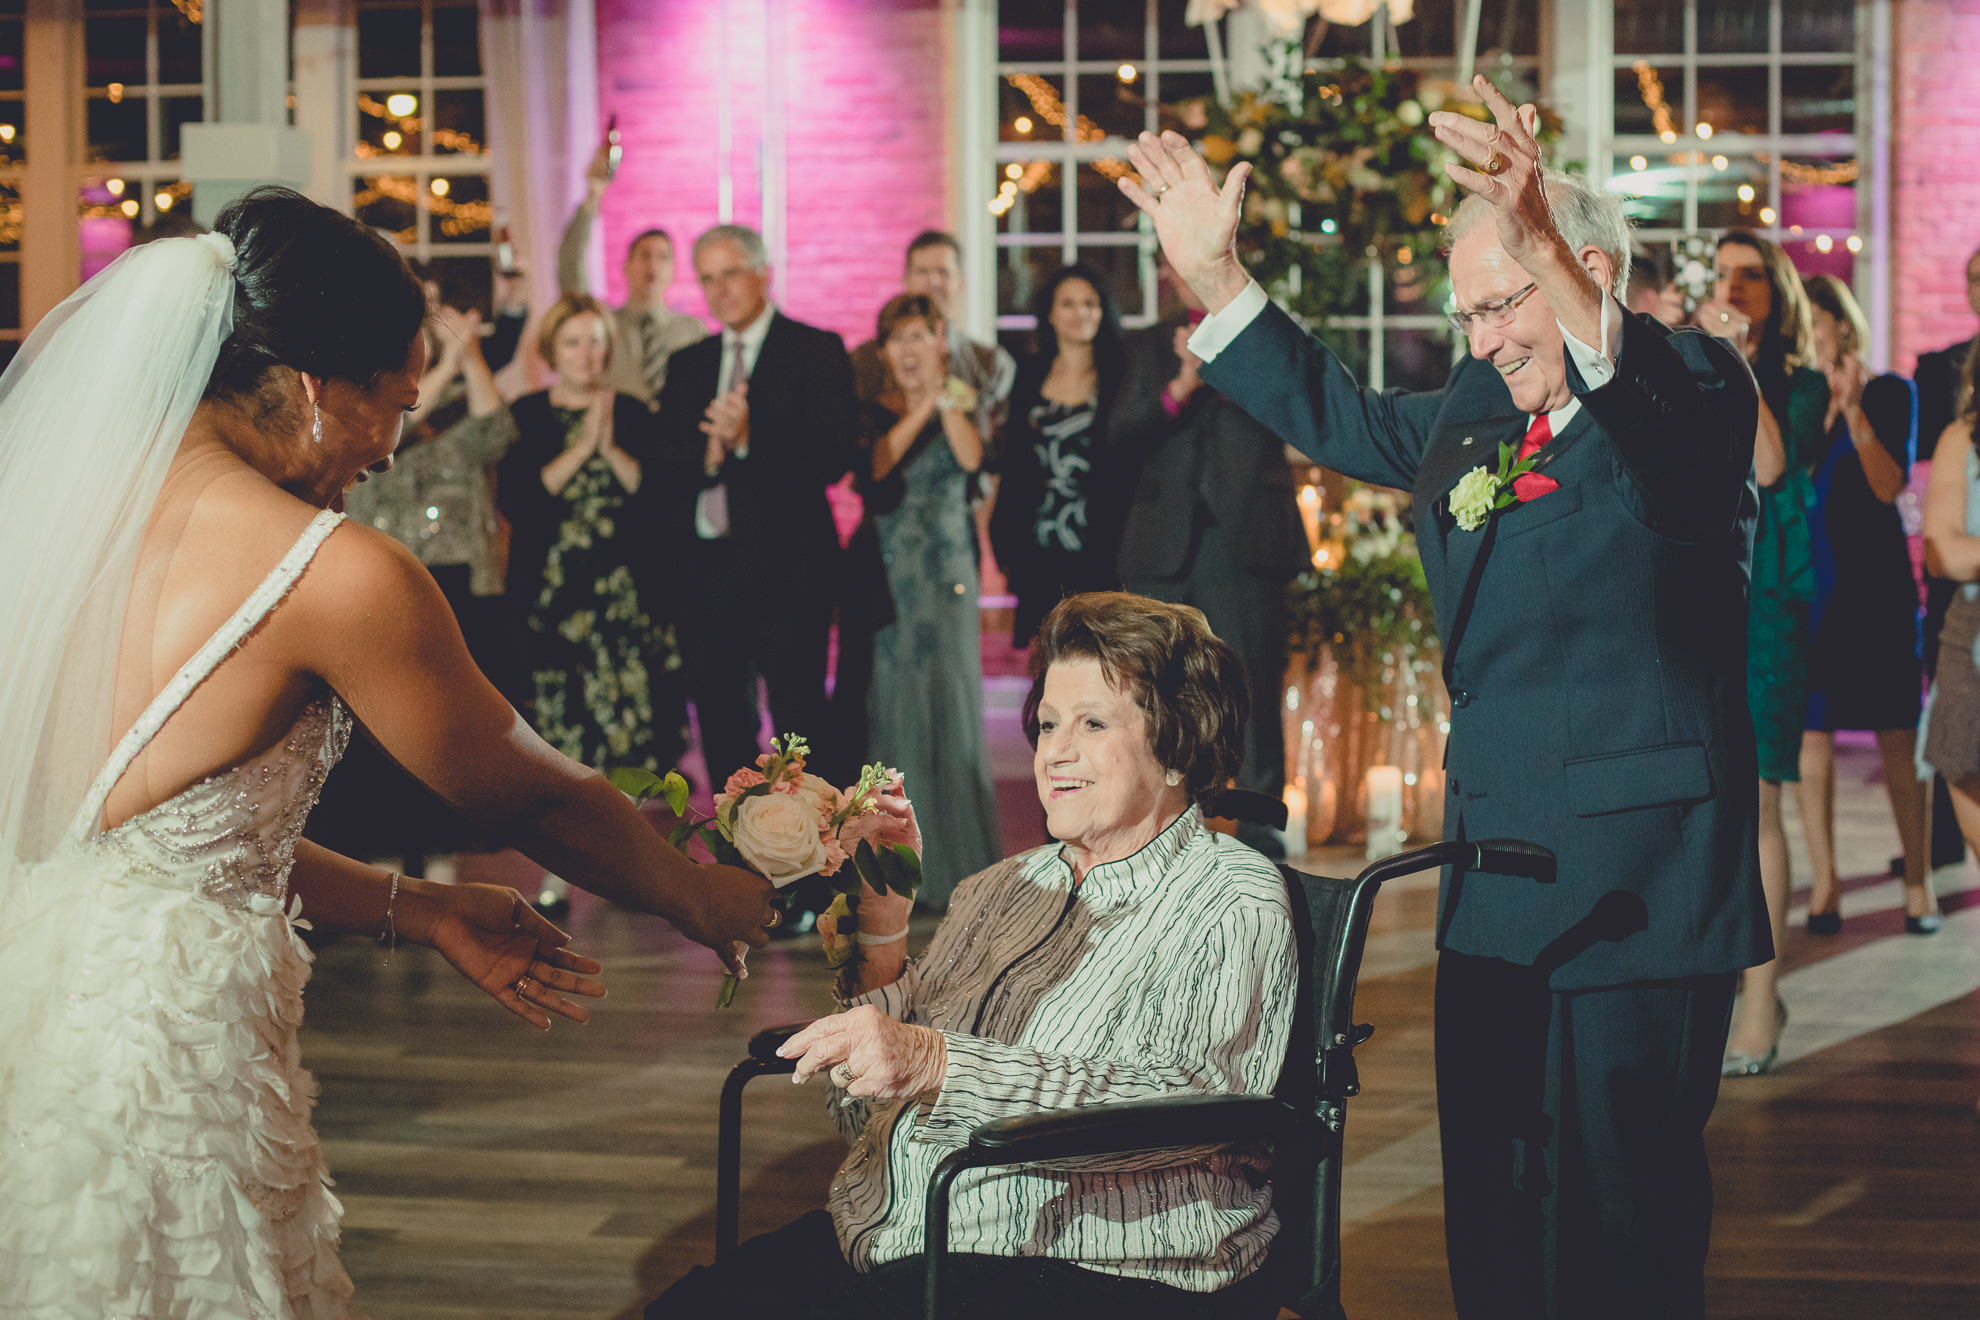 Grandmother receives bouquet from bride after winning anniversary dance at wedding reception at the Foundry Suites in downtown Buffalo, NY